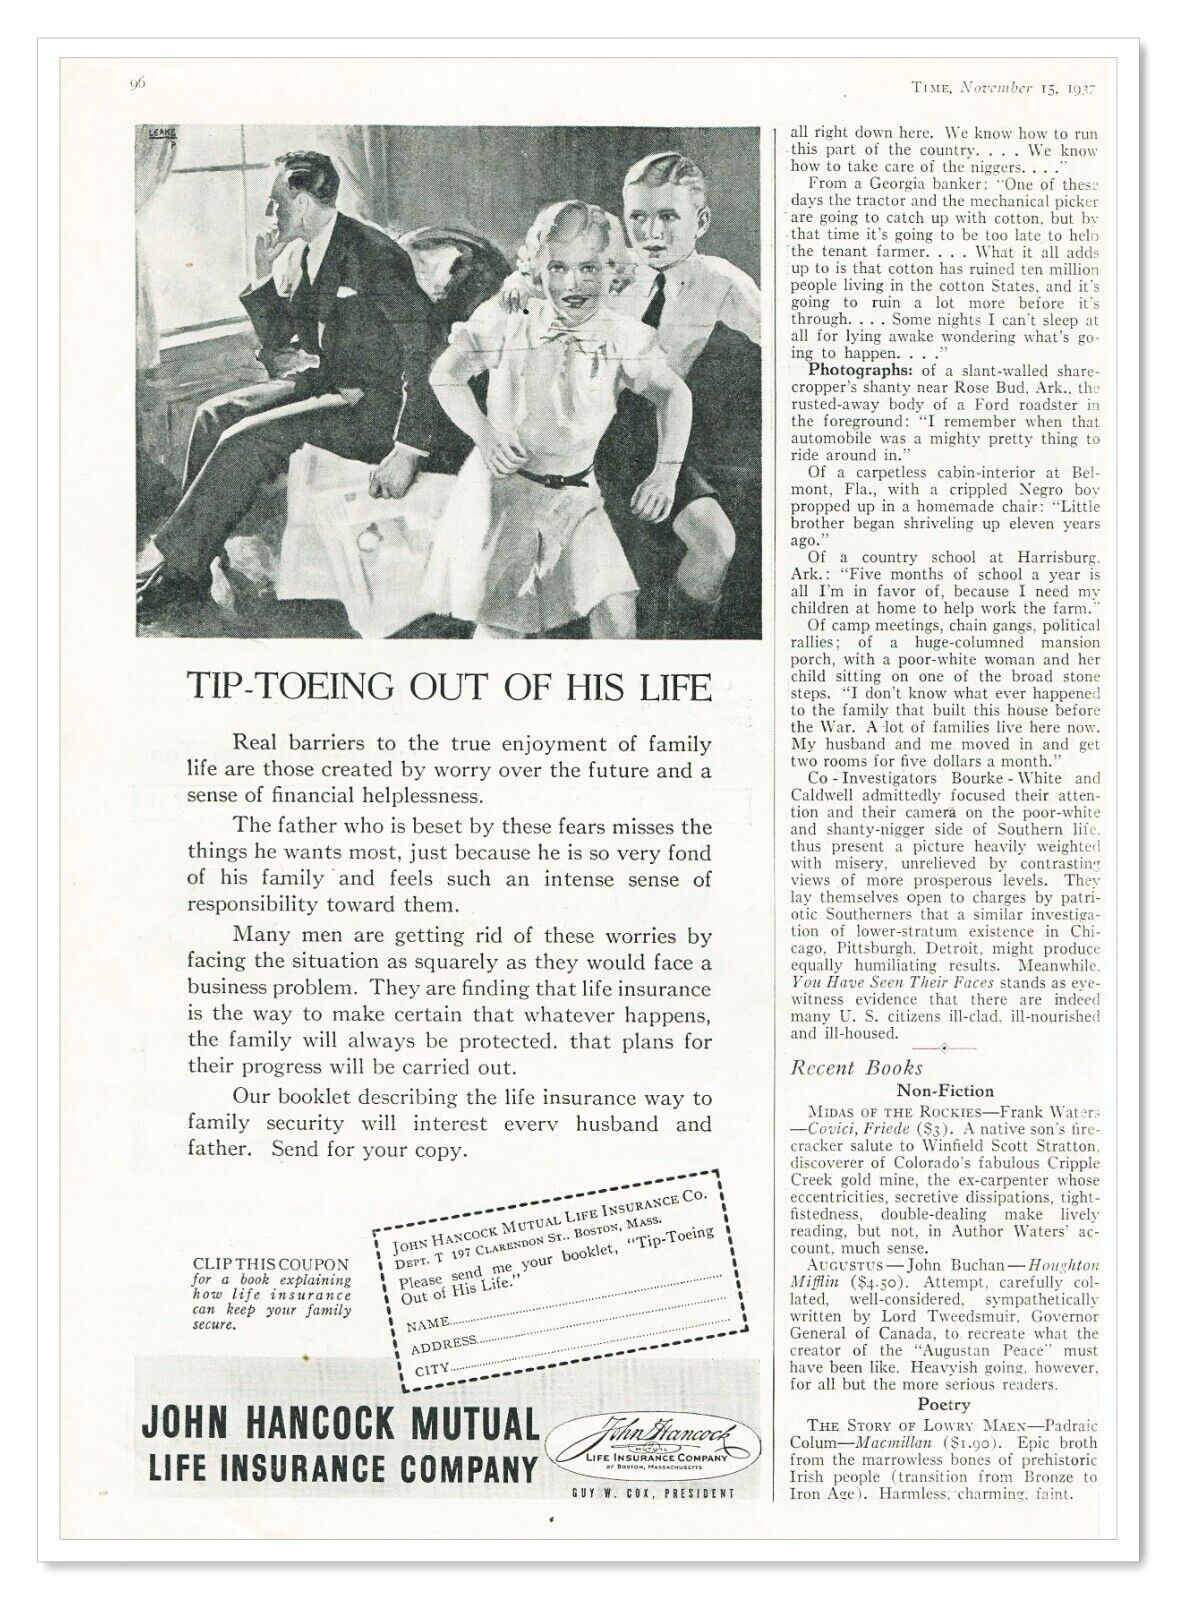 Primary image for Print Ad John Hancock Life Insurance Tip-Toe Vintage 1937 3/4-Page Advertisement